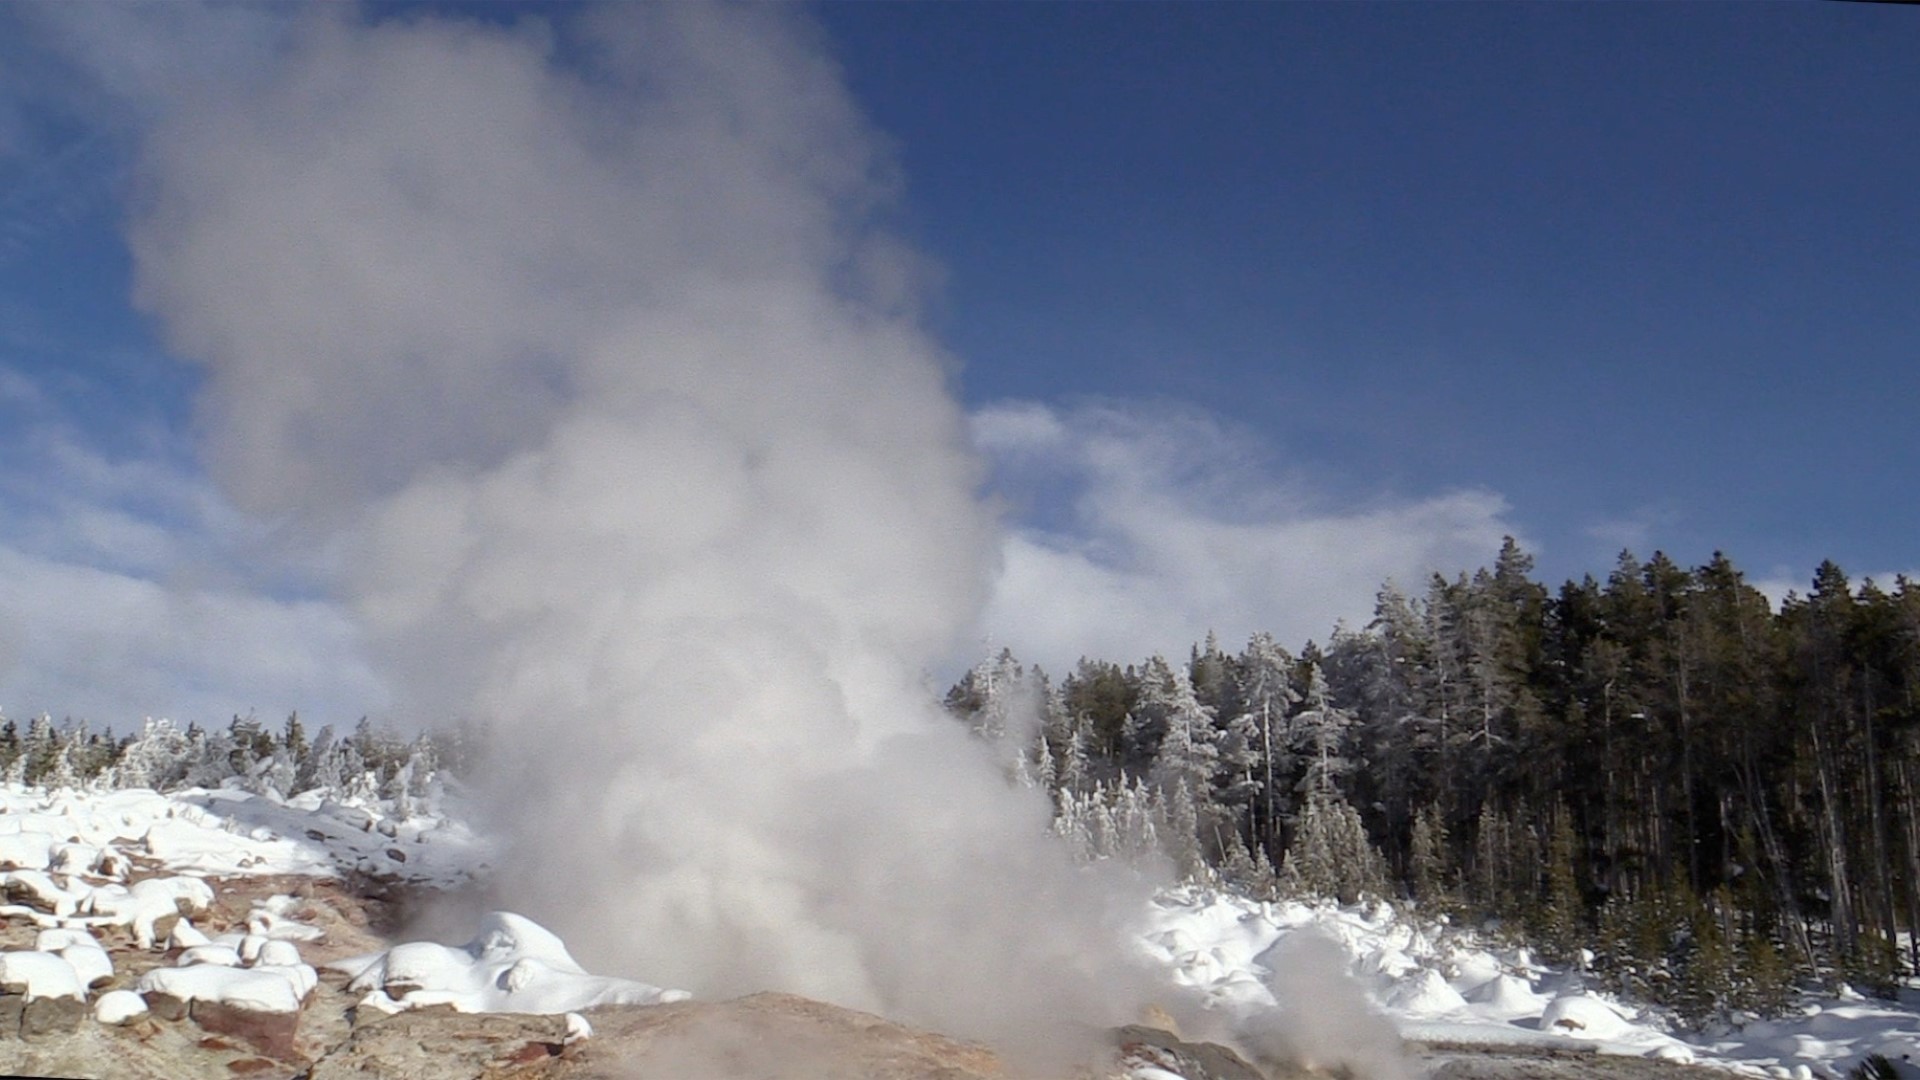 Steamboat Geyser At Yellowstone National Park Had A Record Breaking